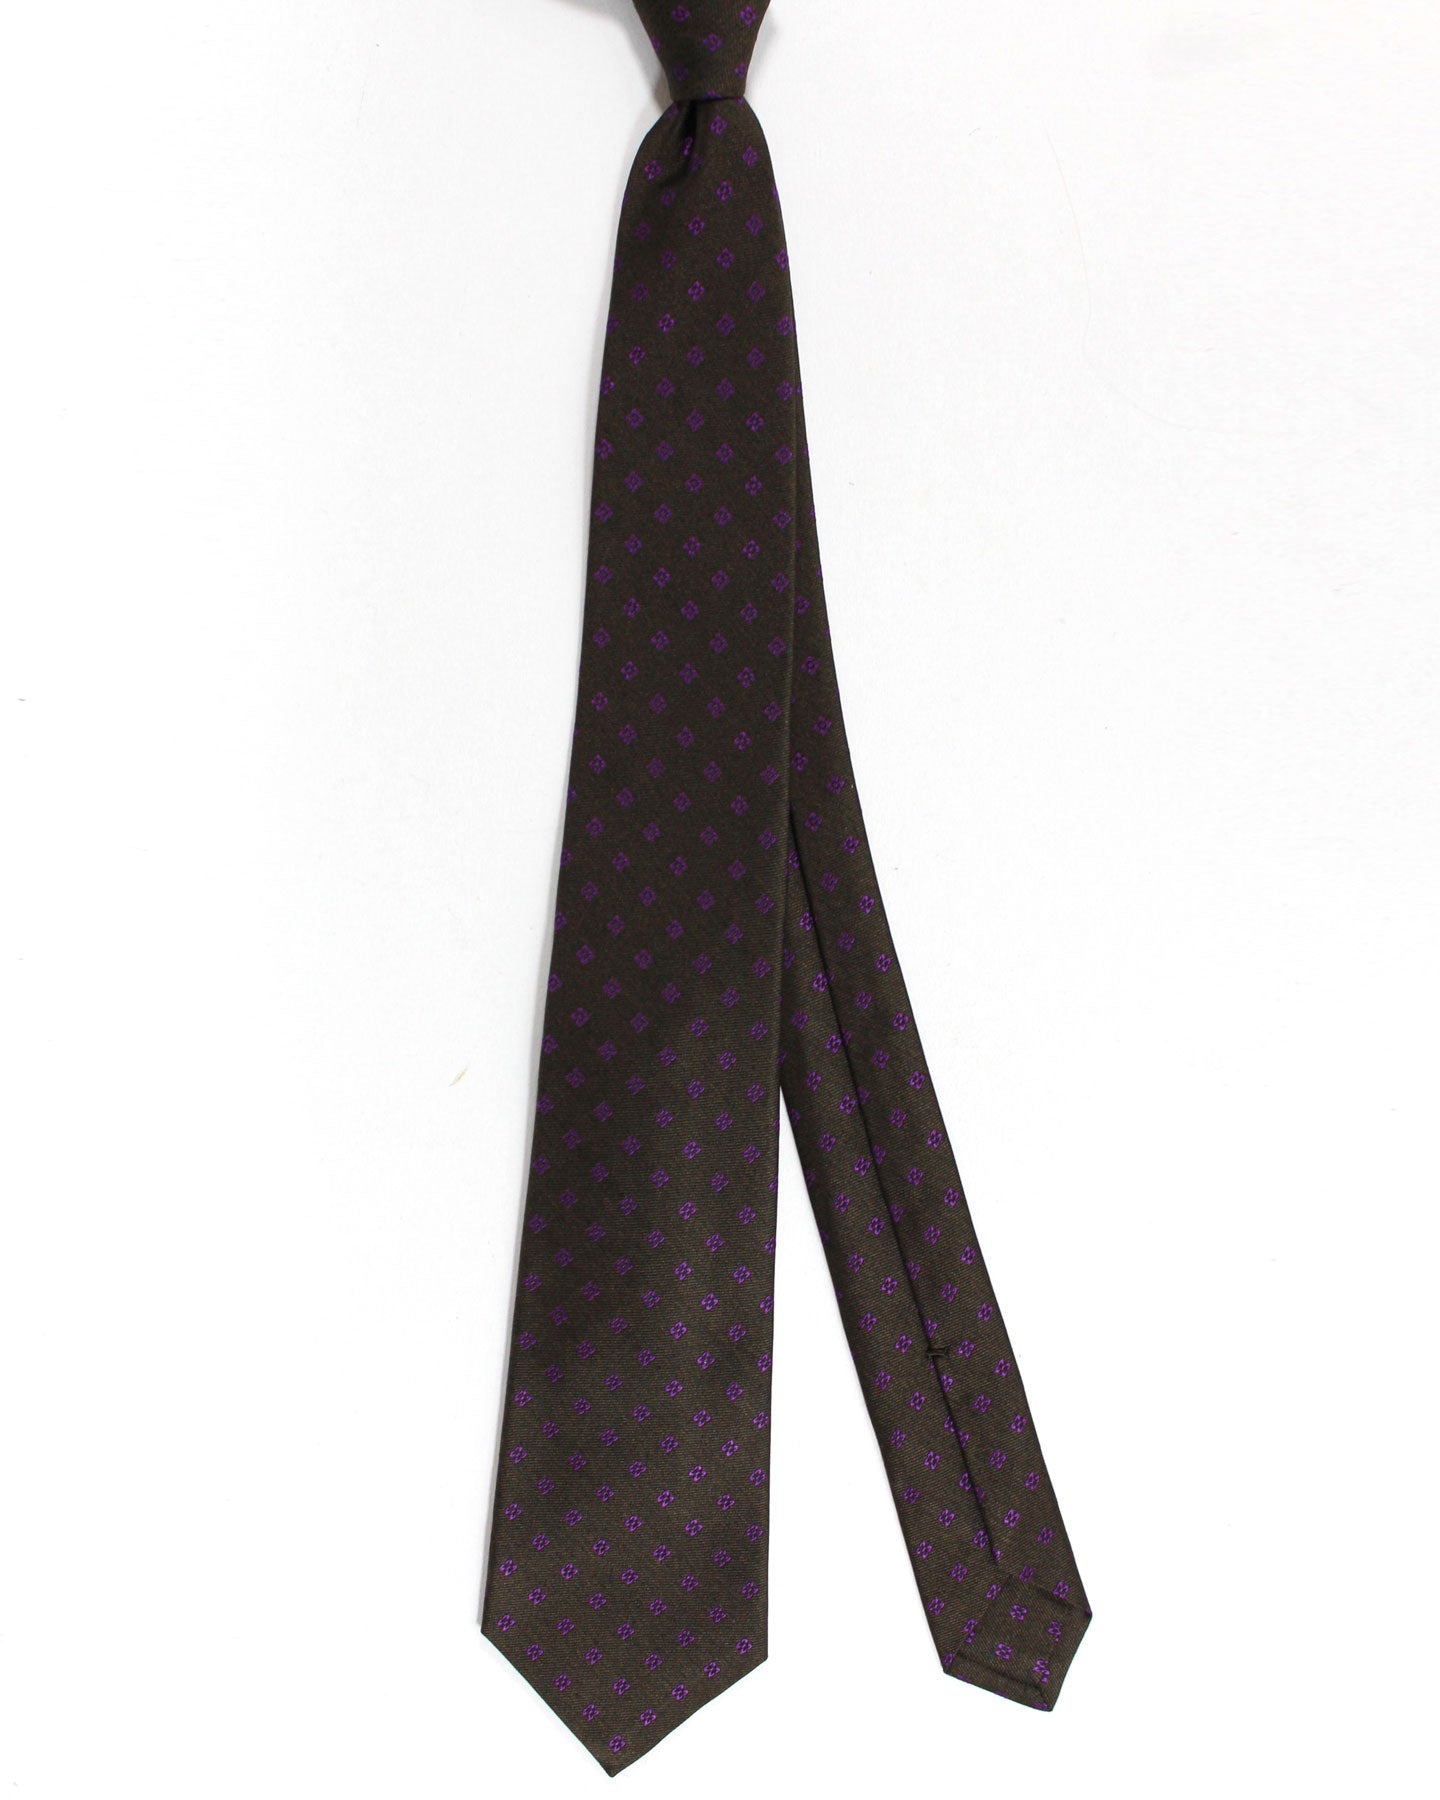 Kiton Sale | Kiton Suits, Ties, Belts, & More | Tie Deals Tagged 